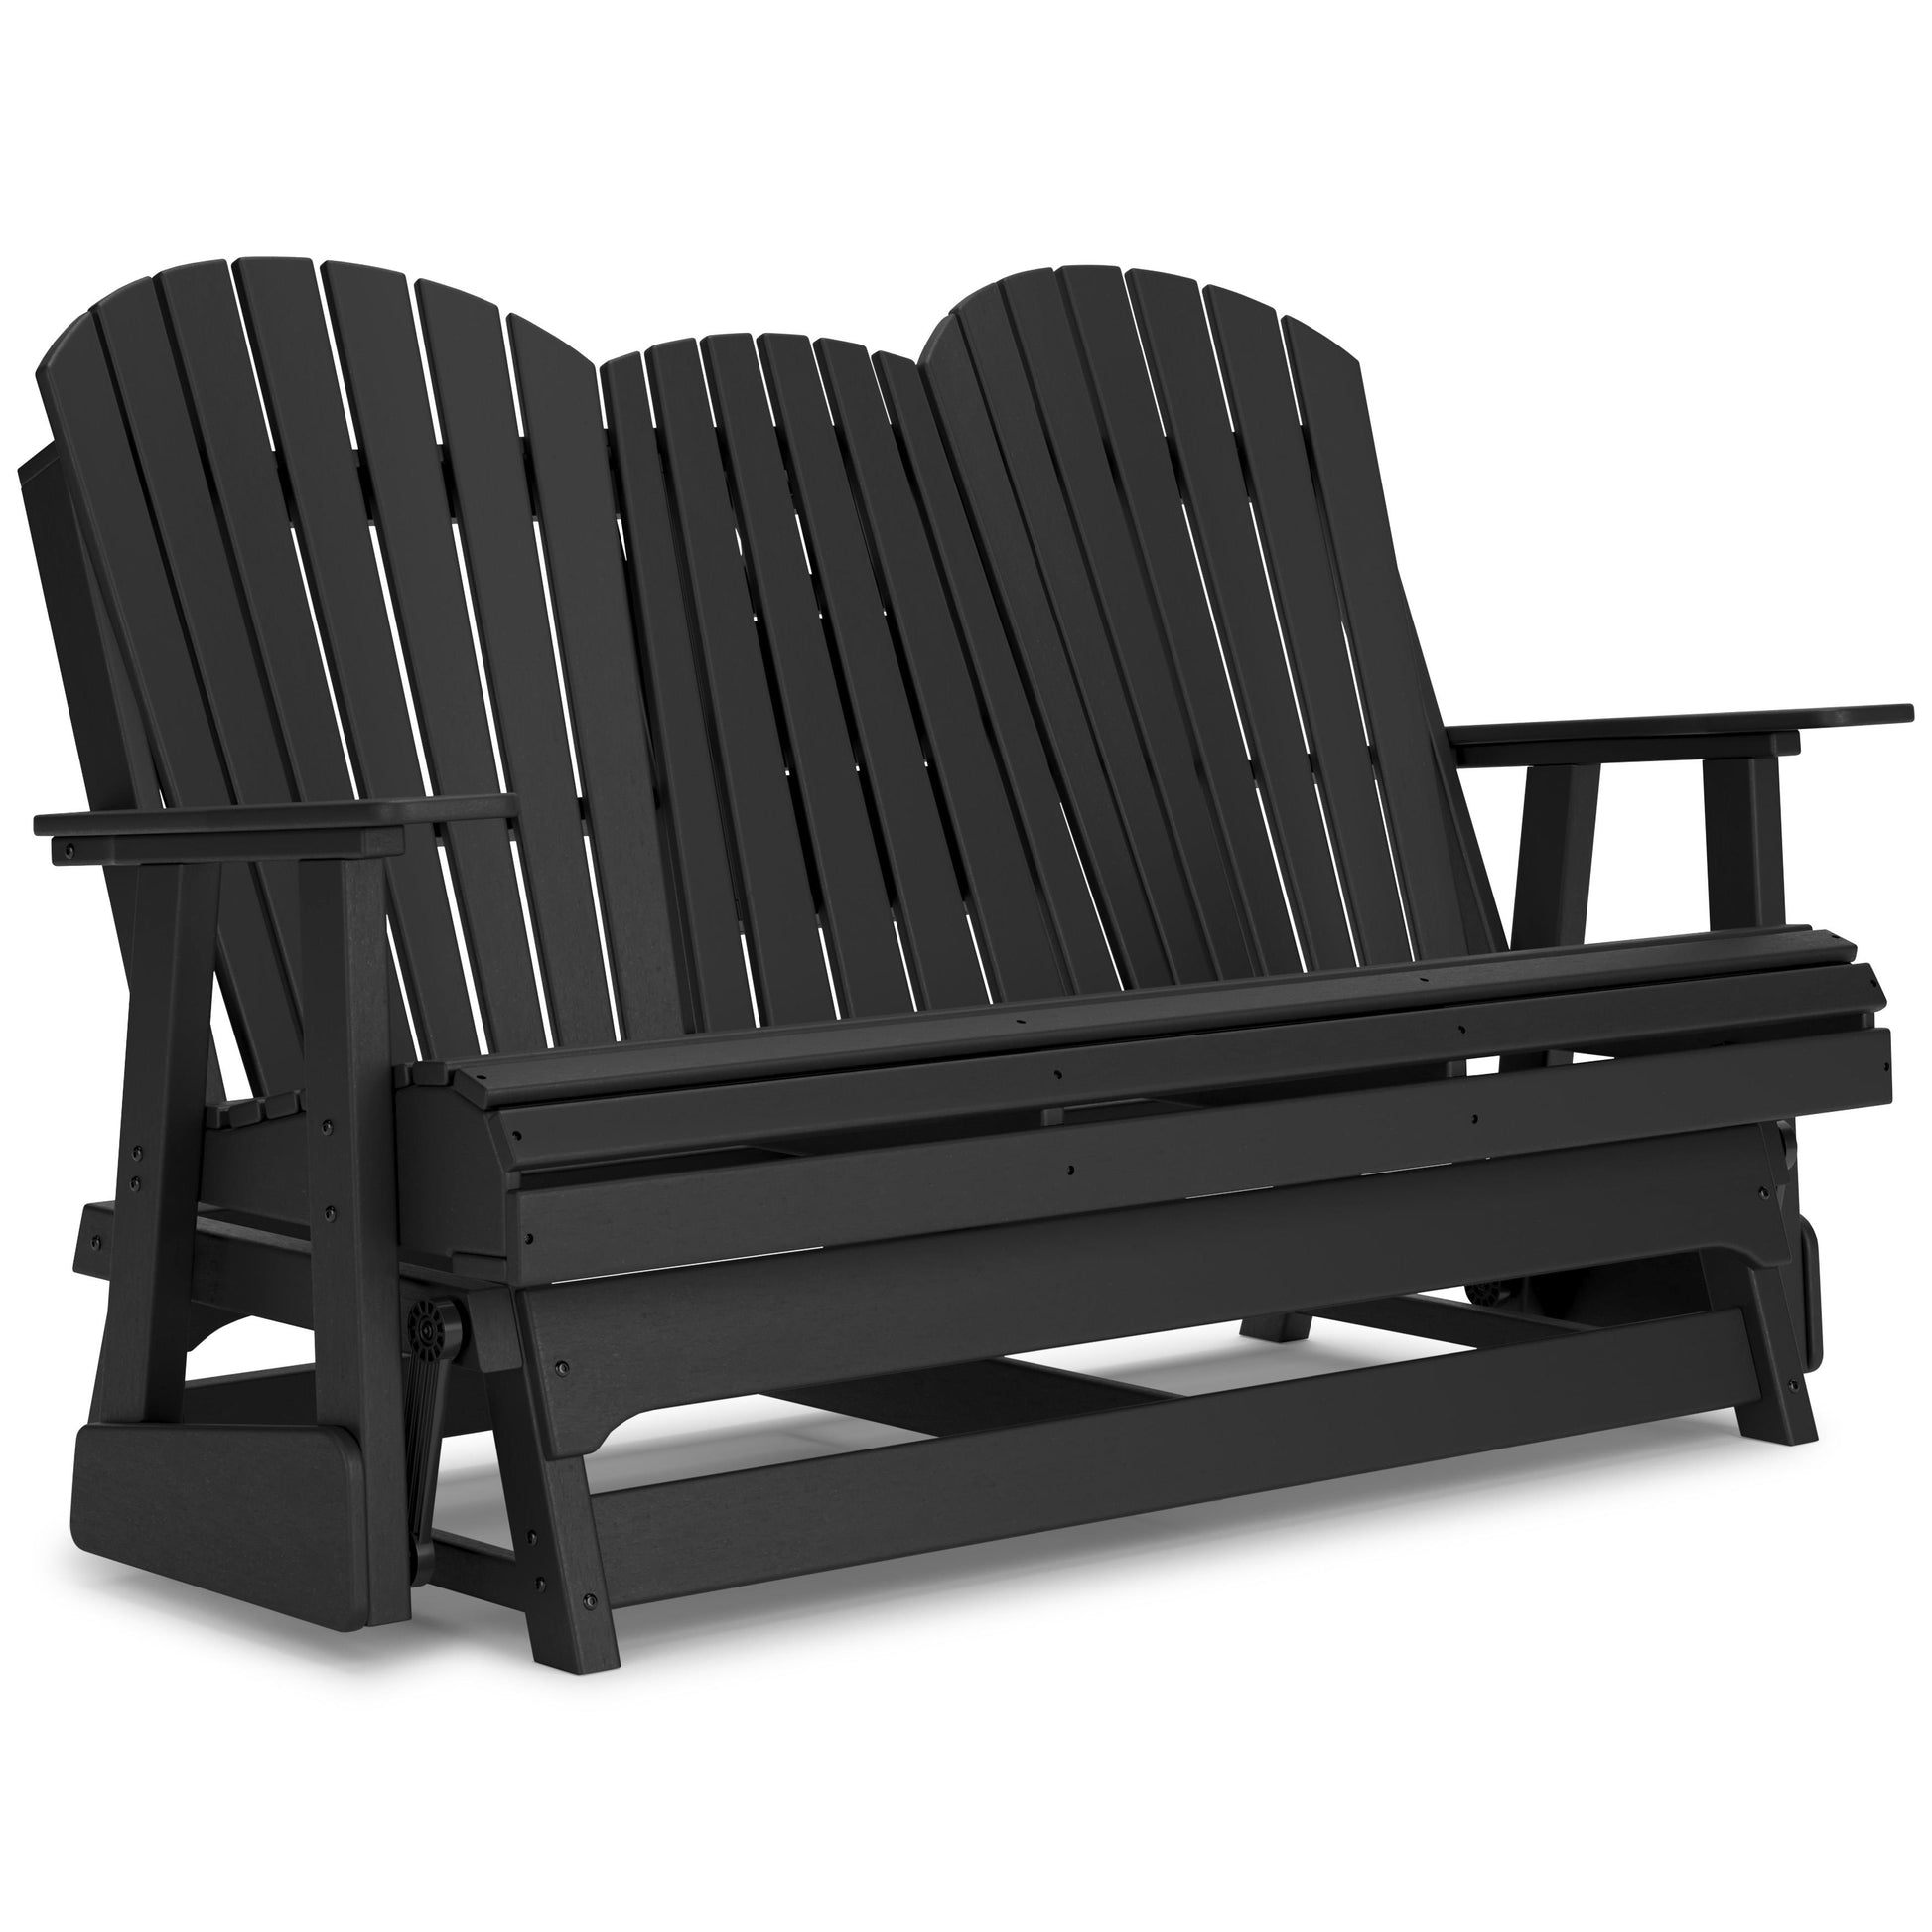 Signature Design by Ashley Outdoor Seating Loveseats P108-835 IMAGE 1